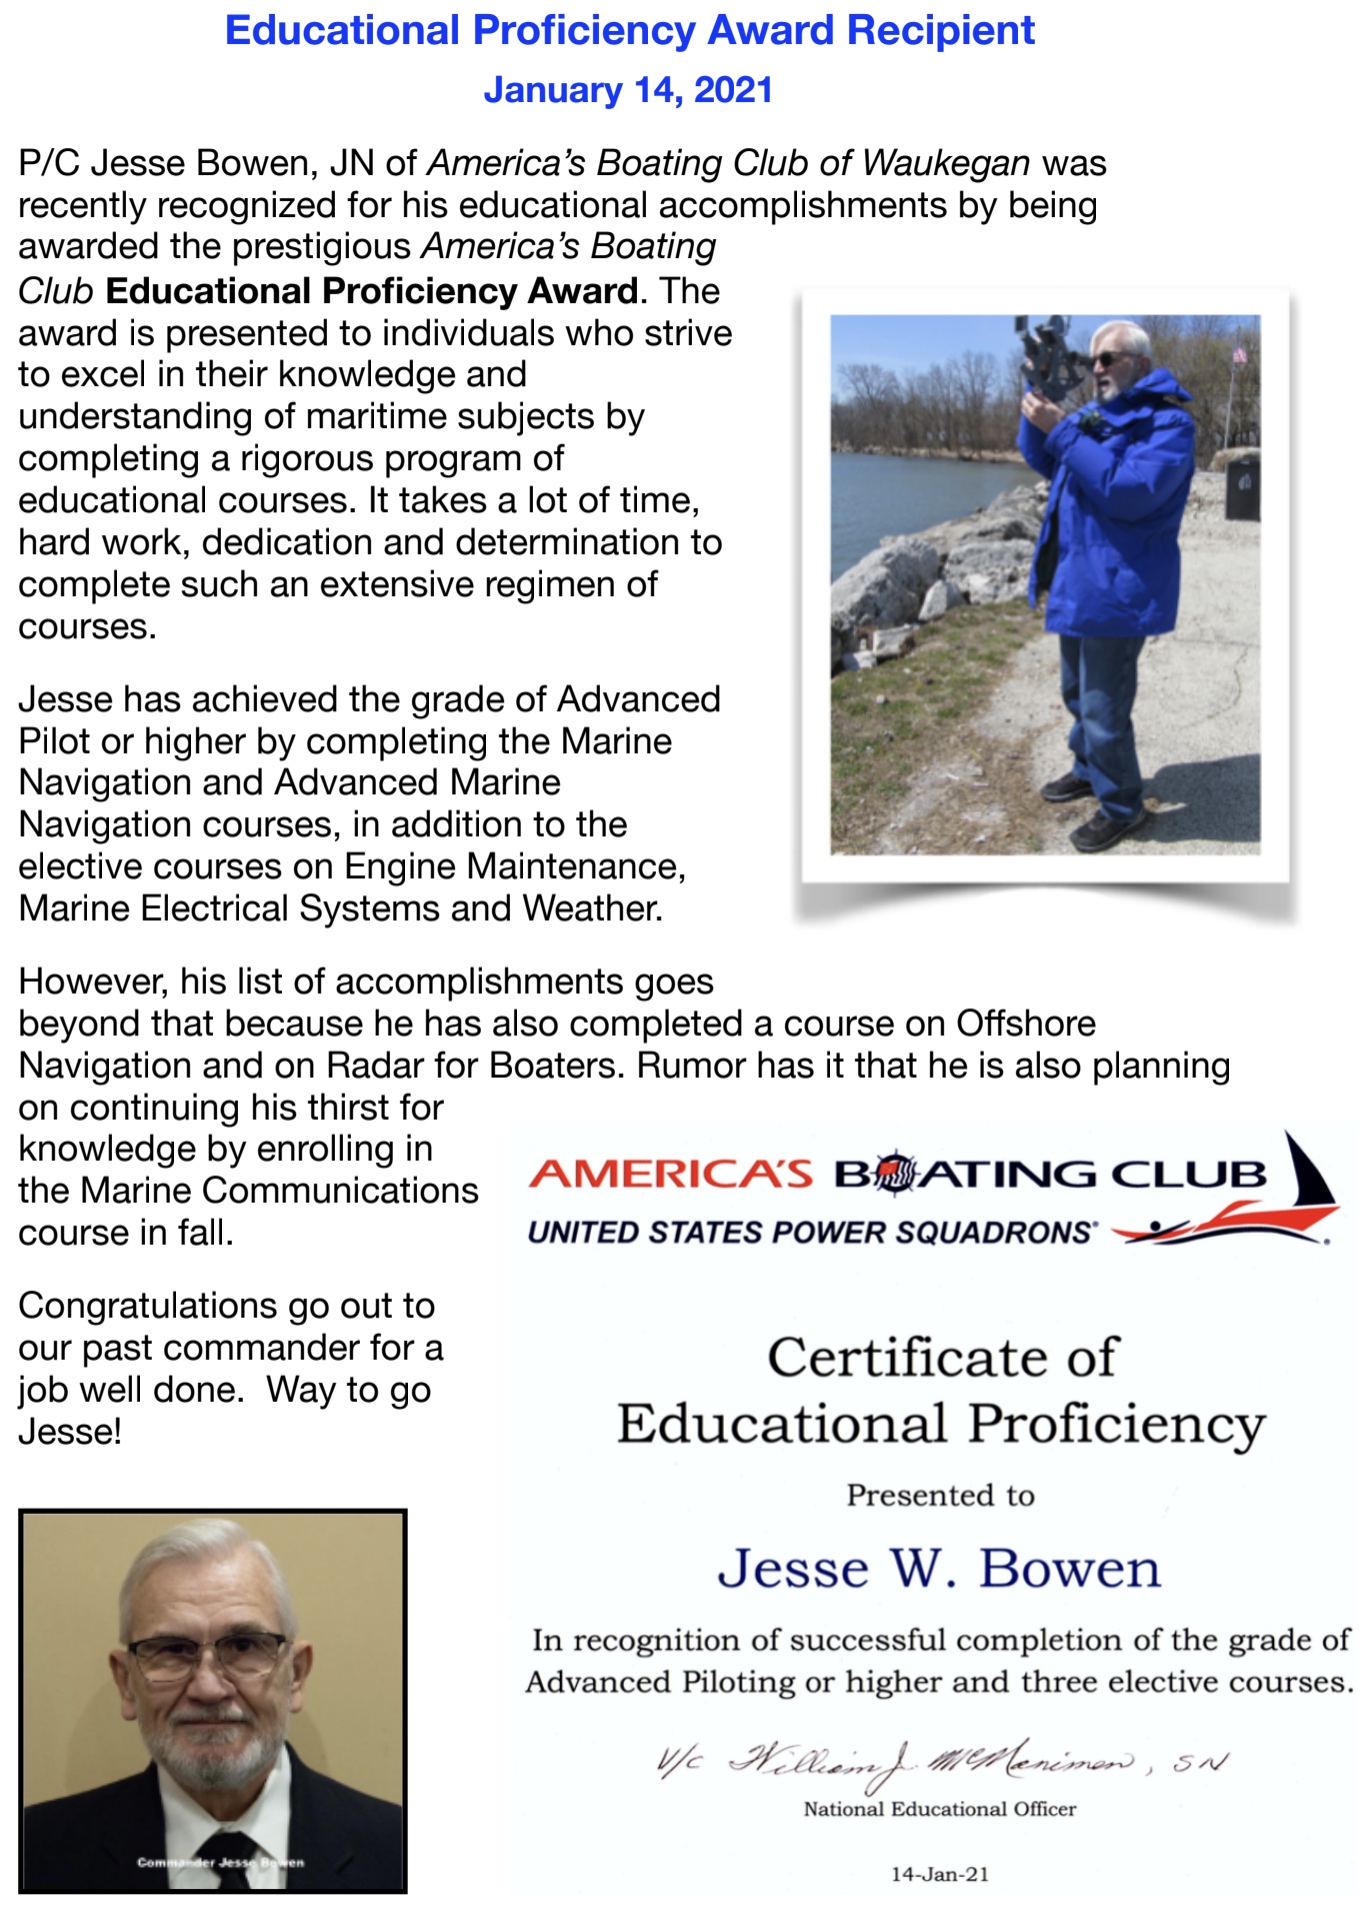 Pictured is the Jesse Bowen Educational Proficiency Award